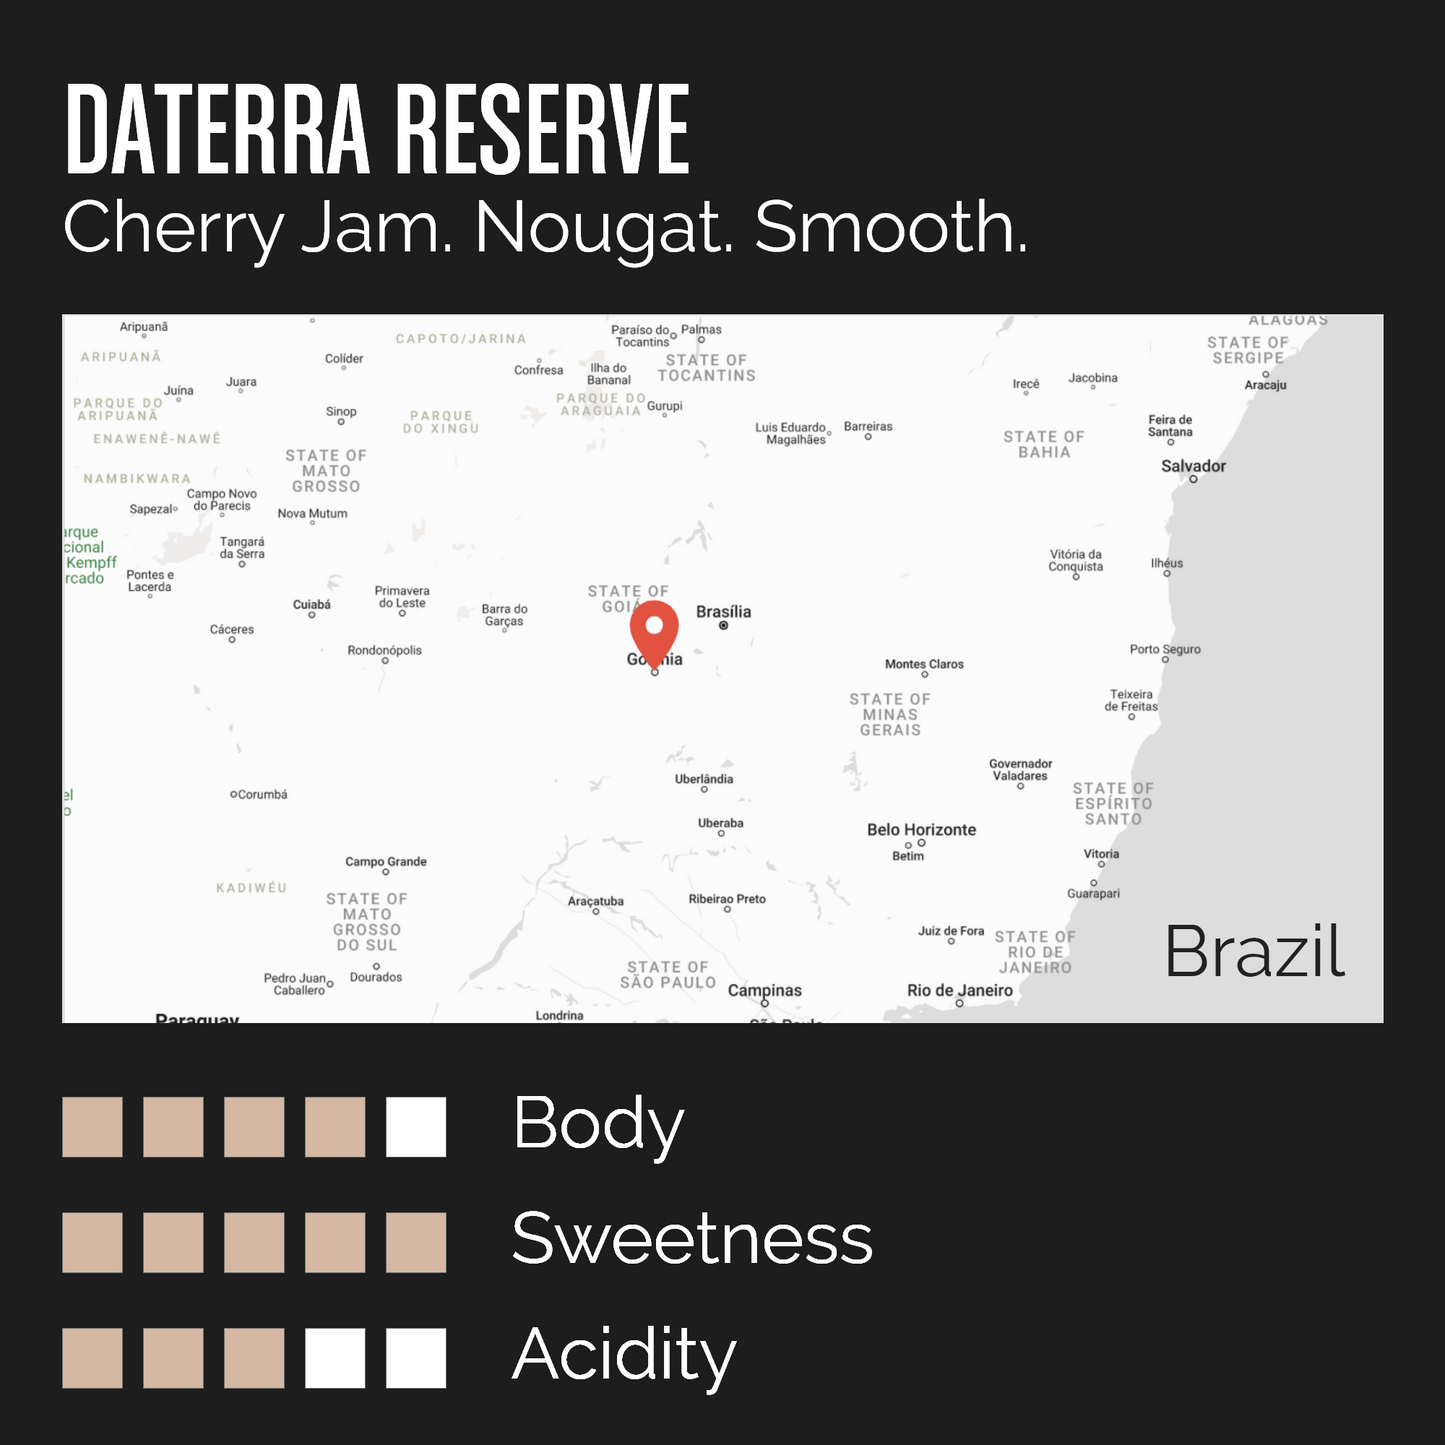 DATERRA RESERVE LOW CAF COFFEE DETAILS AND TASTE NOTES (4595155828816)